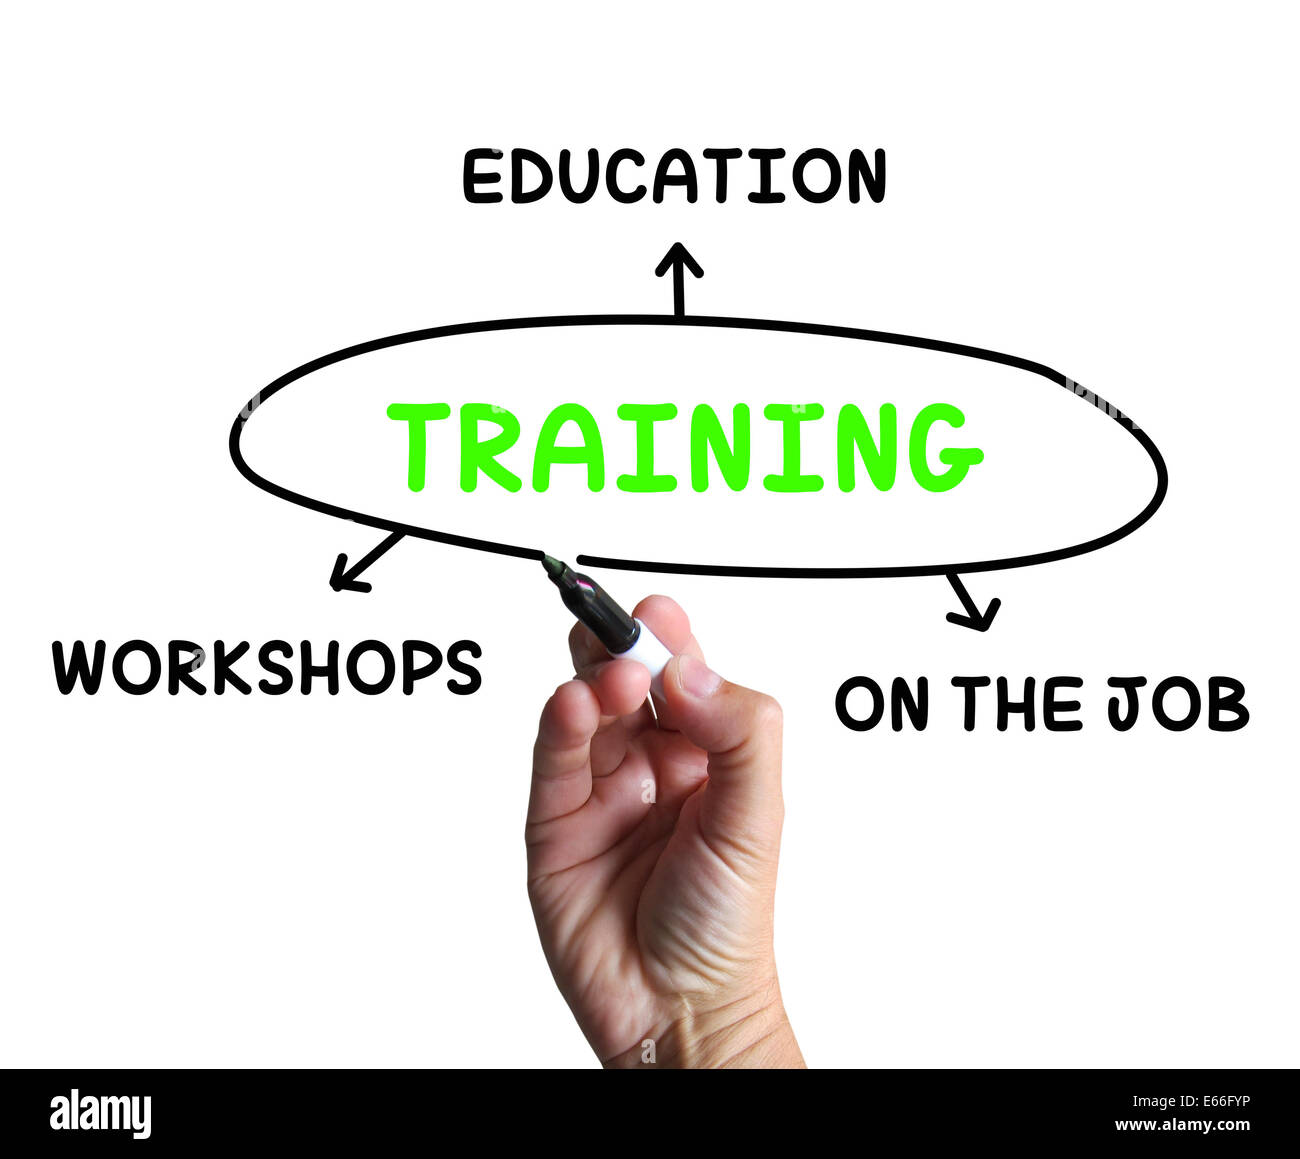 Training Diagram Showing Workshops Groundwork And Educating Stock Photo